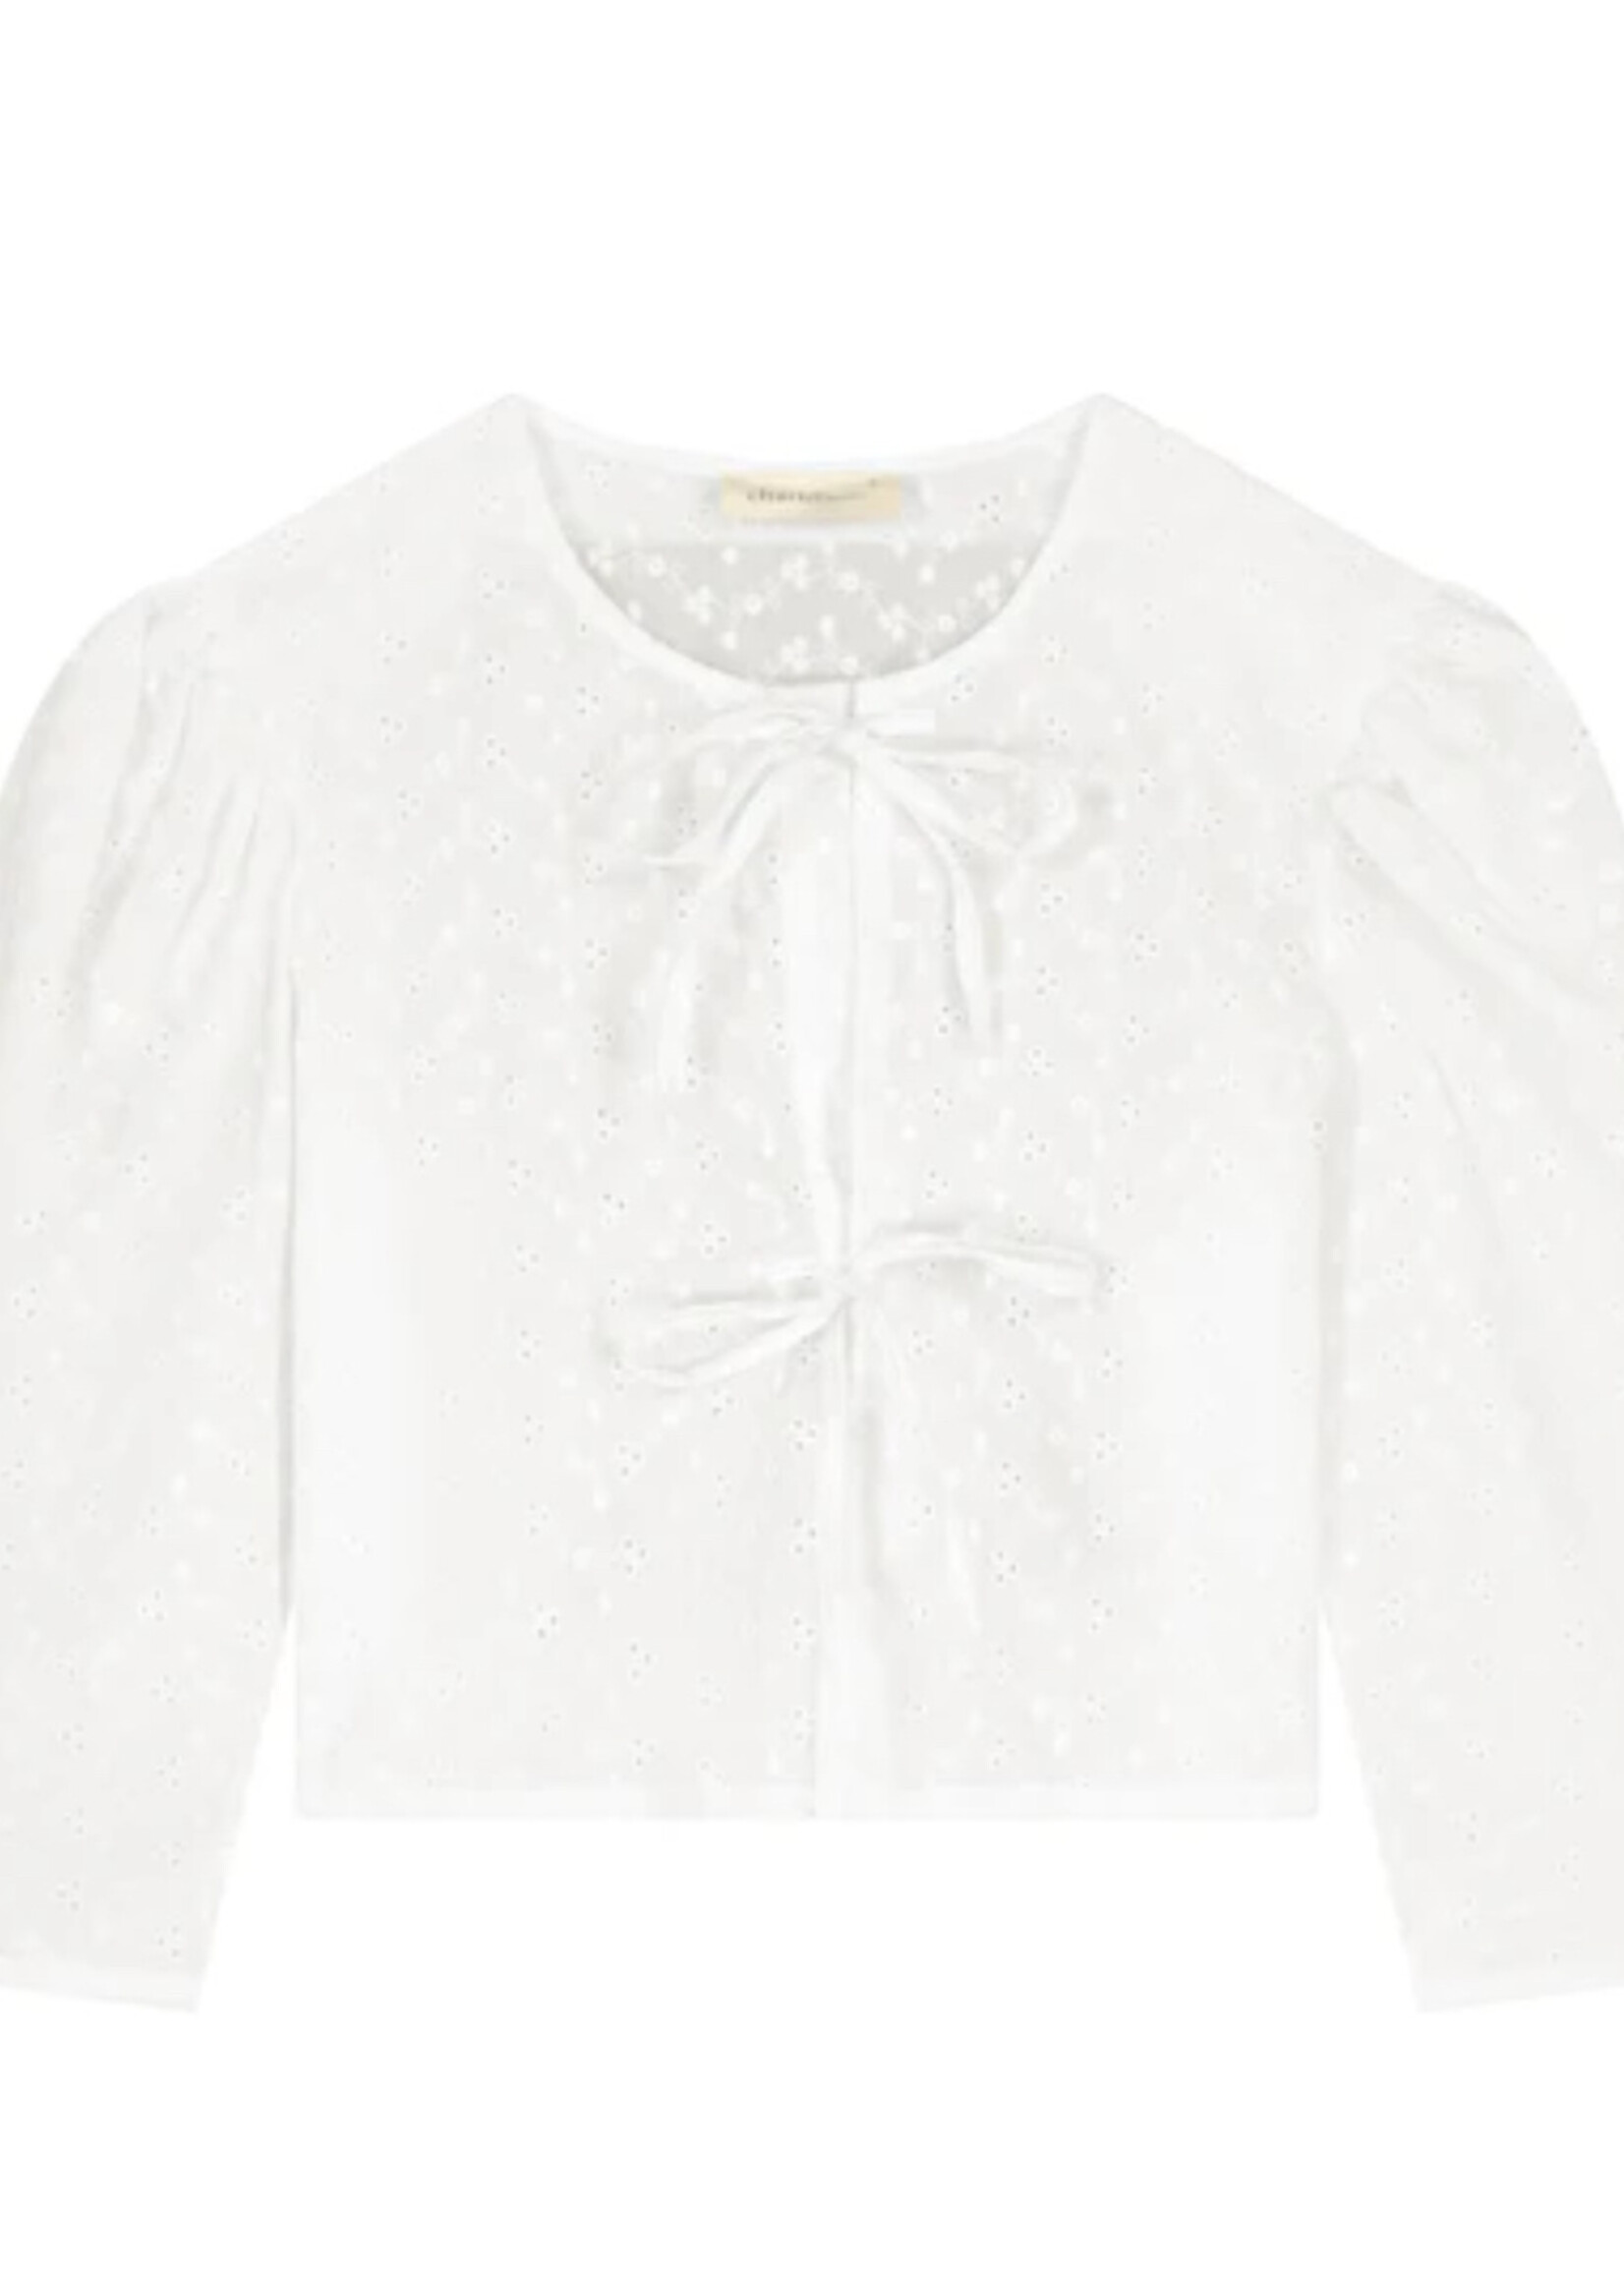 Charlie Petite Blouse Mommy Off white - Charlie Petite